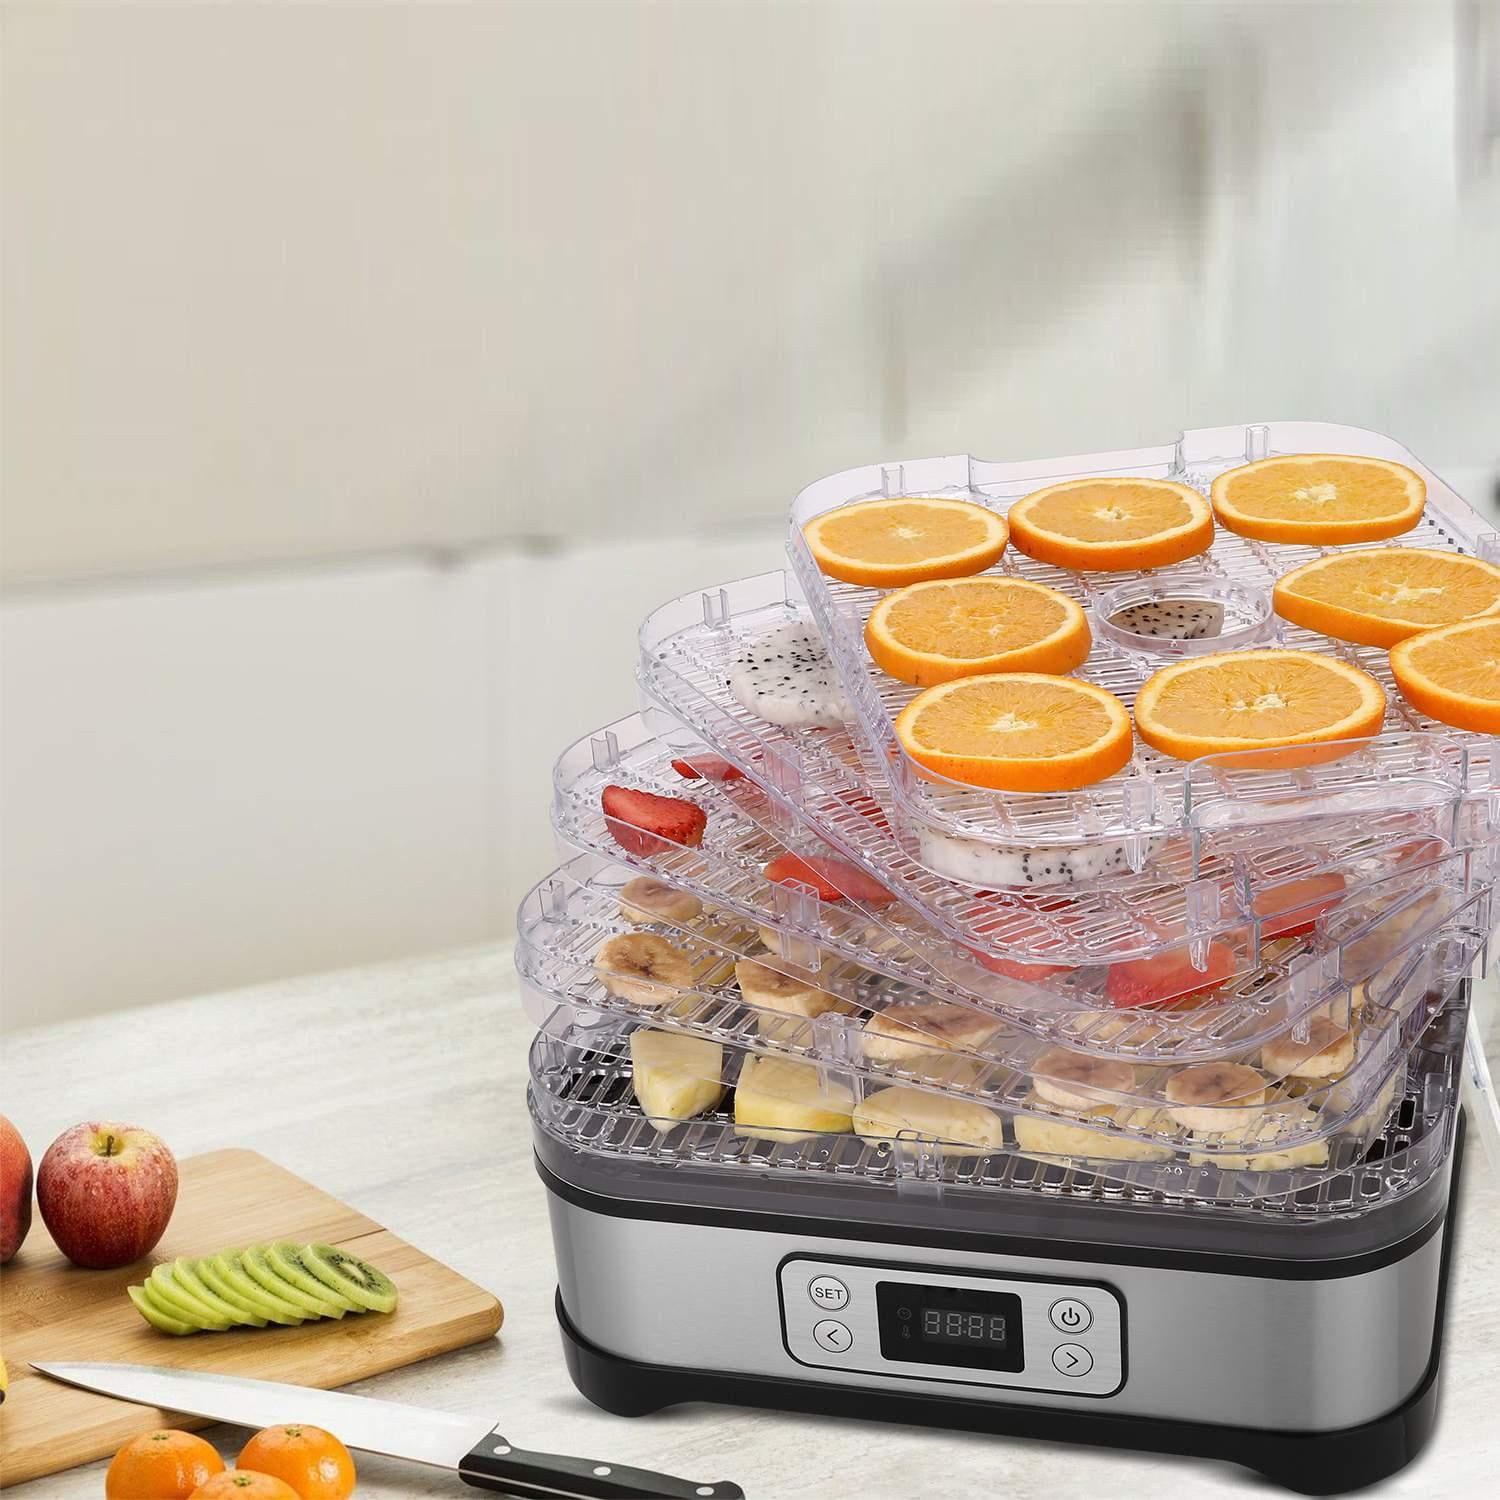 Food Dehydrator 5 Trays Electric Mini Pet Snack Dryer, 3570°C Fruit Dryer  for Jerky, Fruits, Herbs, Veggies Home Use Air Dryer & Snack Dehydrator